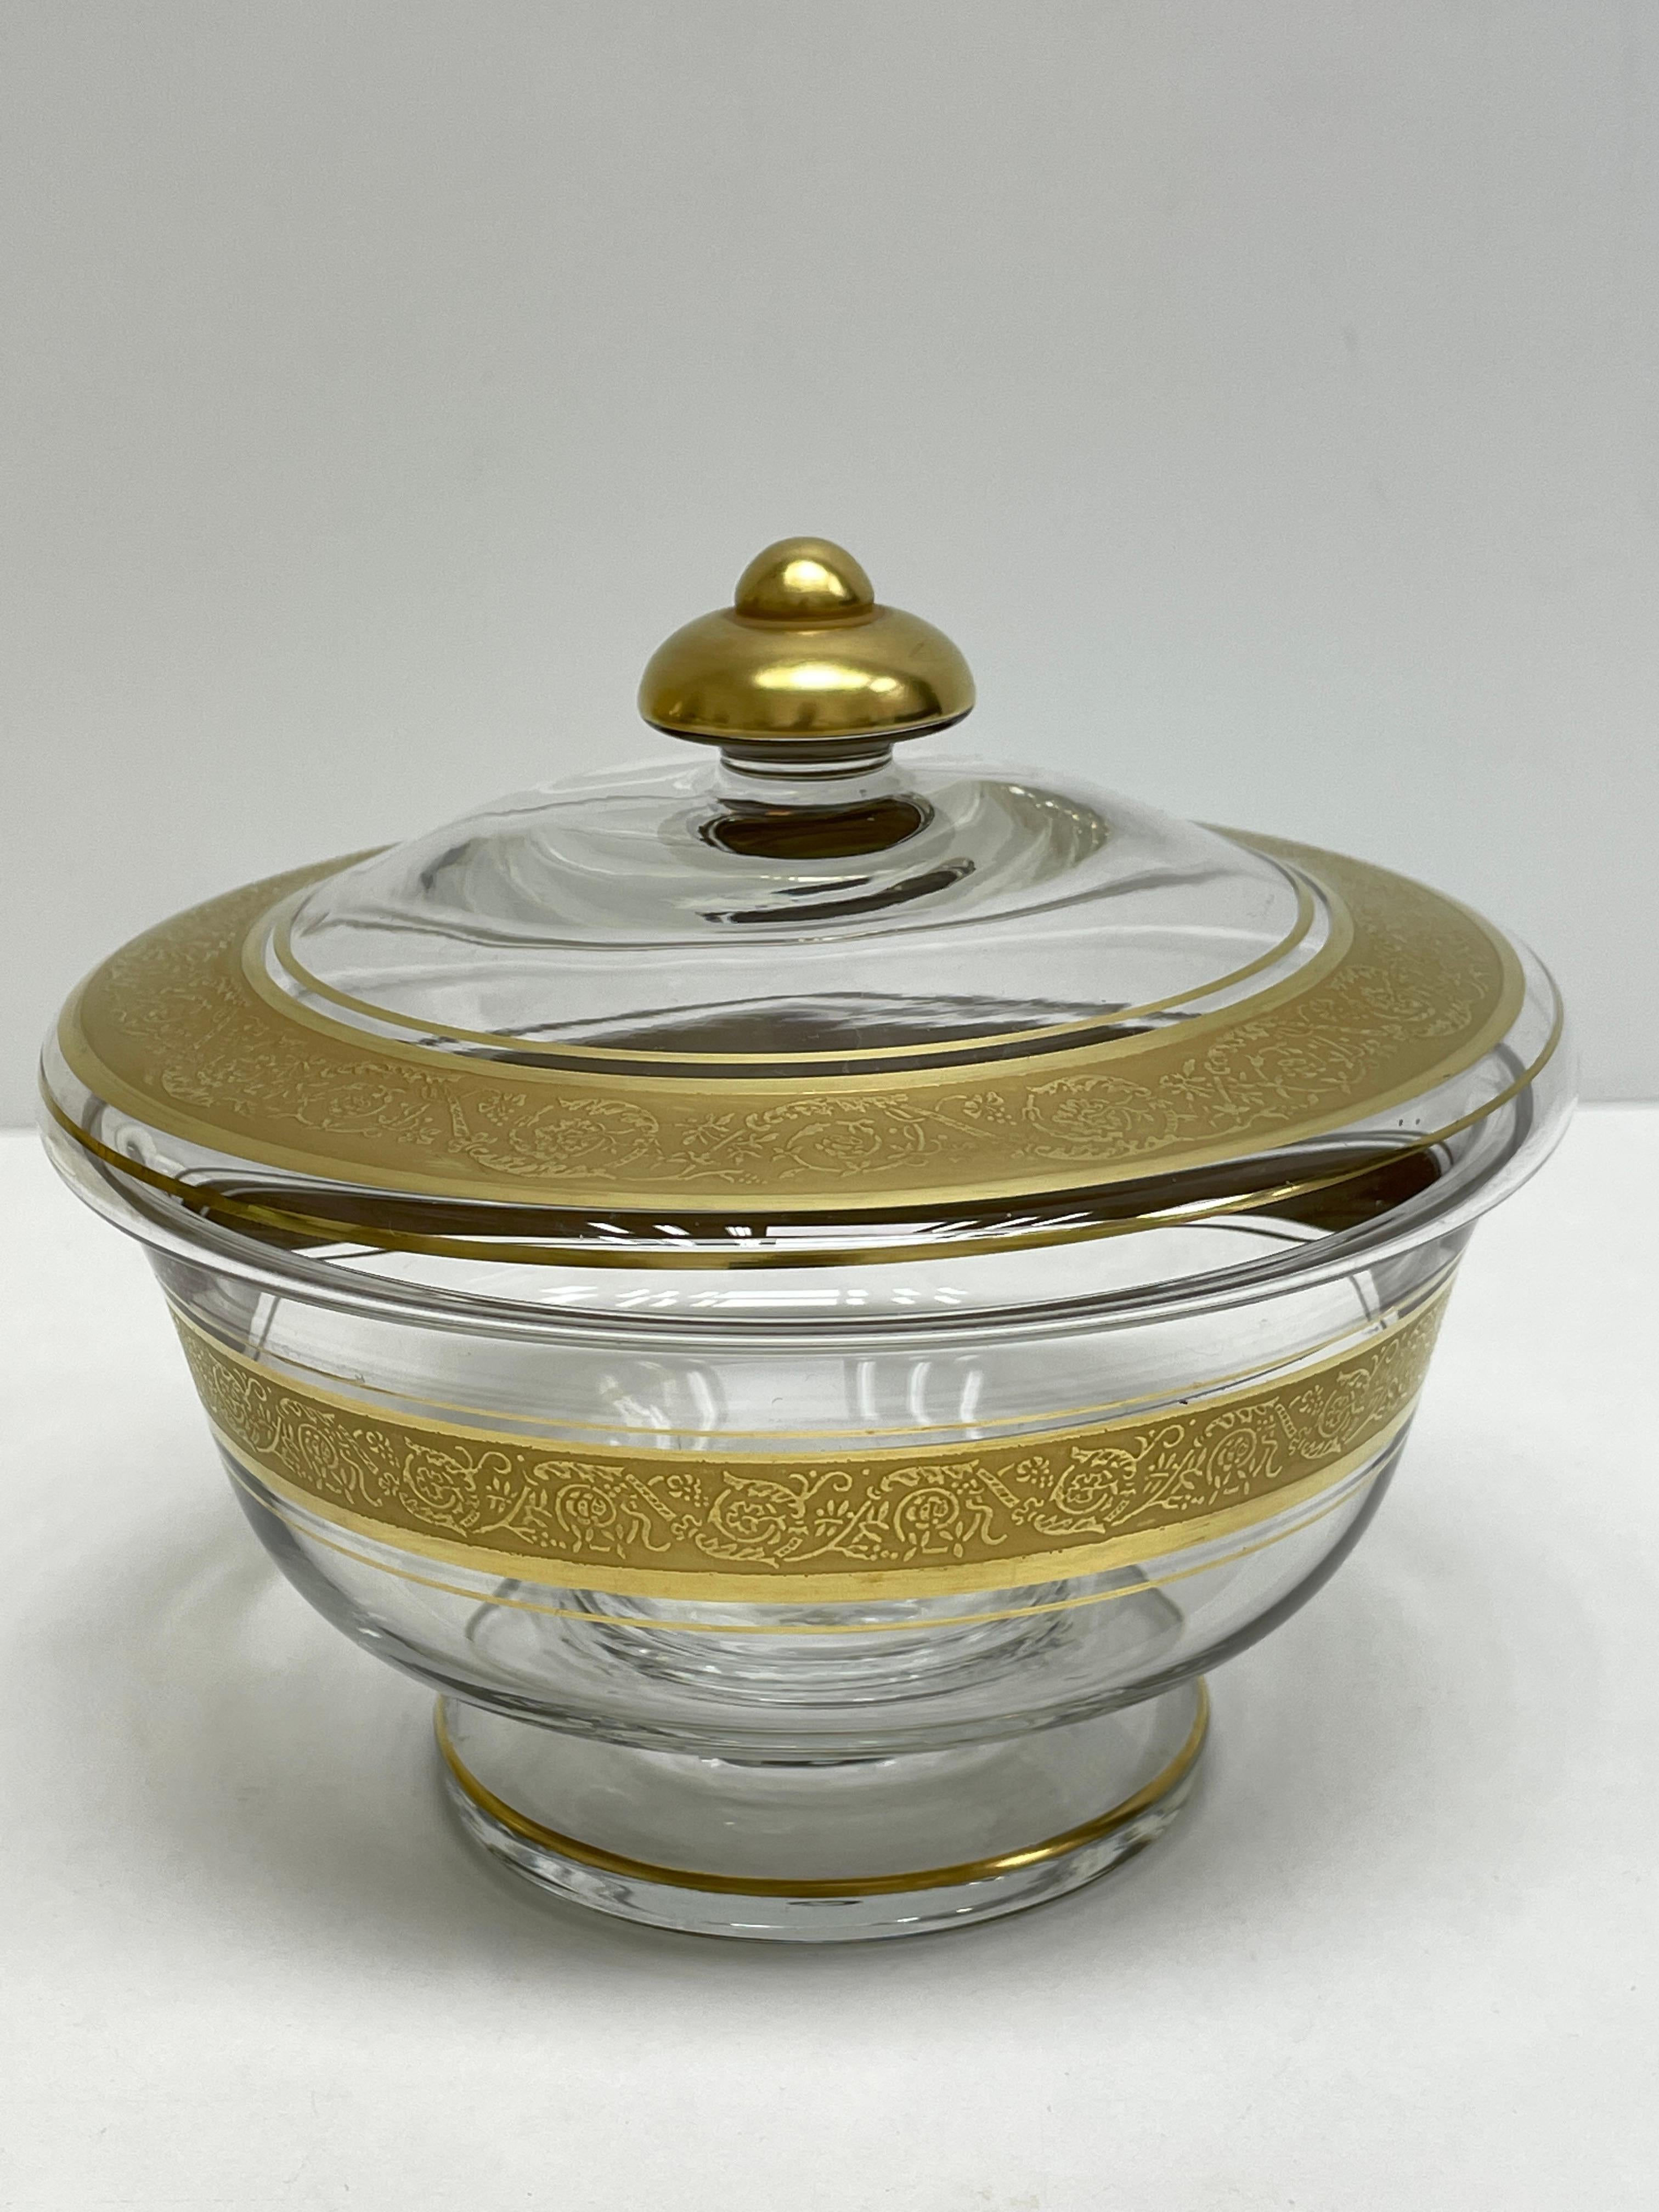 Beautiful Glass Bowl, Candy or Cake Bowl with 24k Gold Rim, Moser Glass Carlsbad In Good Condition For Sale In Nuernberg, DE